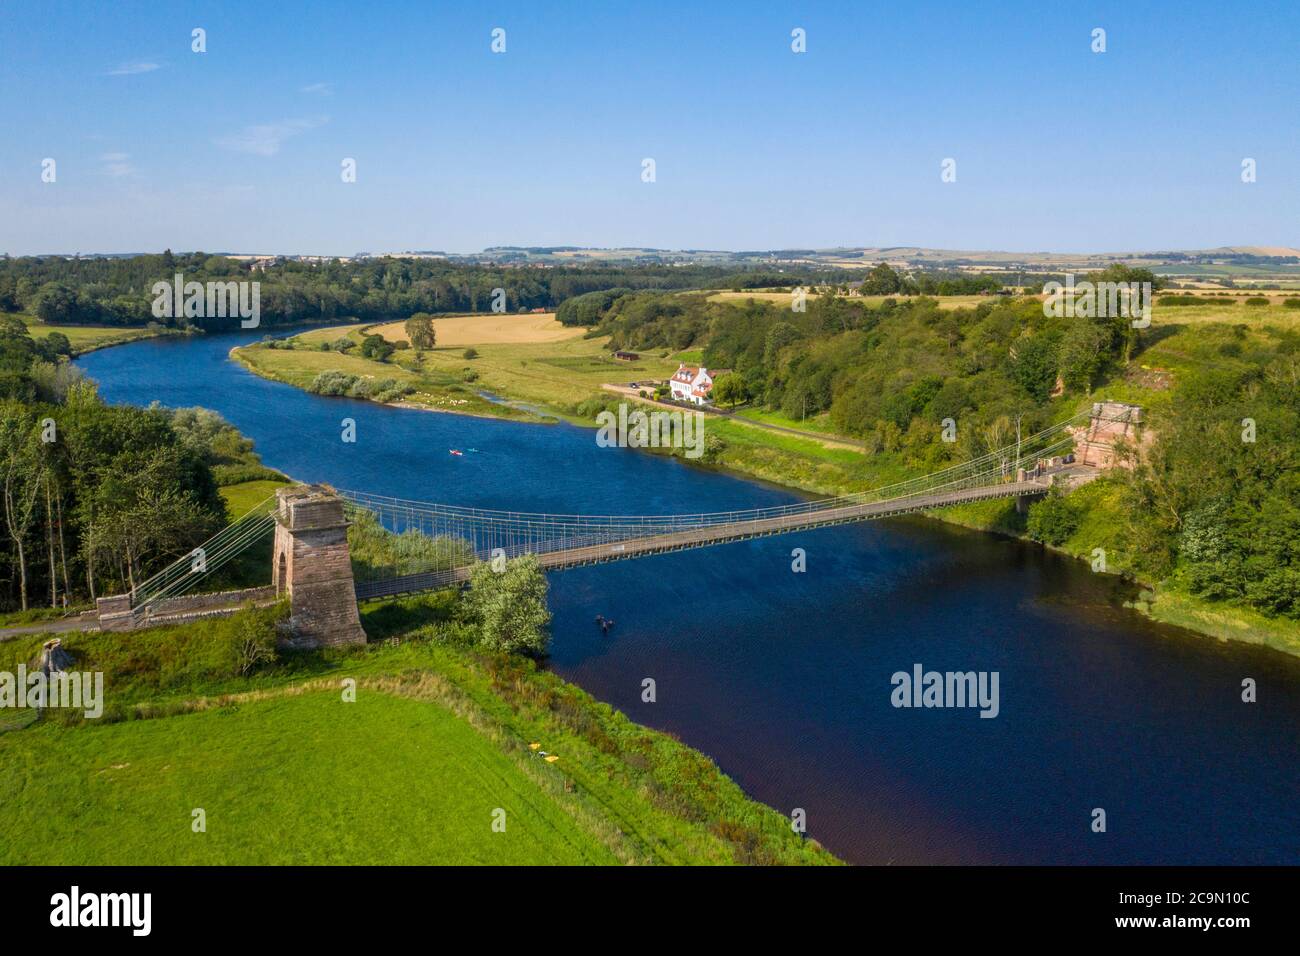 The Union Suspension Bridge which spans the river Tweed between Horncliffe, Northumberland, England and Fishwick, Scottish Borders, Scotland. Stock Photo